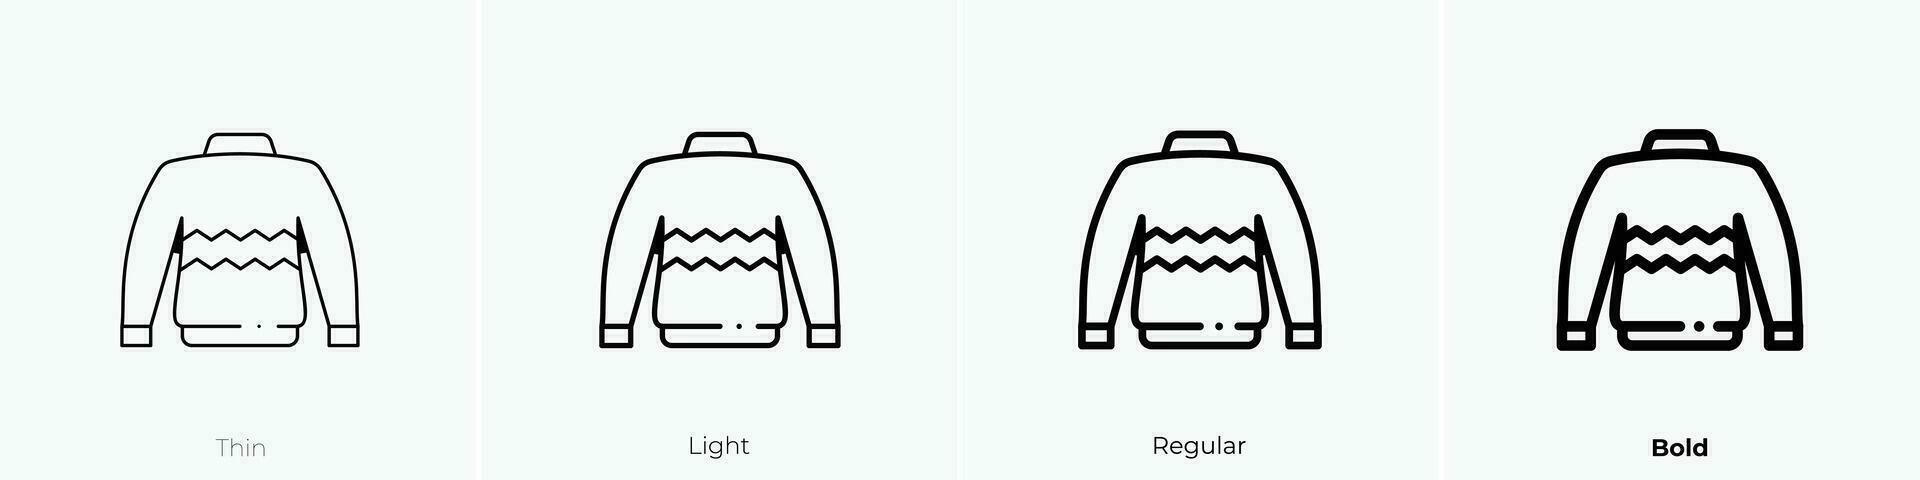 sweater icon. Thin, Light, Regular And Bold style design isolated on white background vector